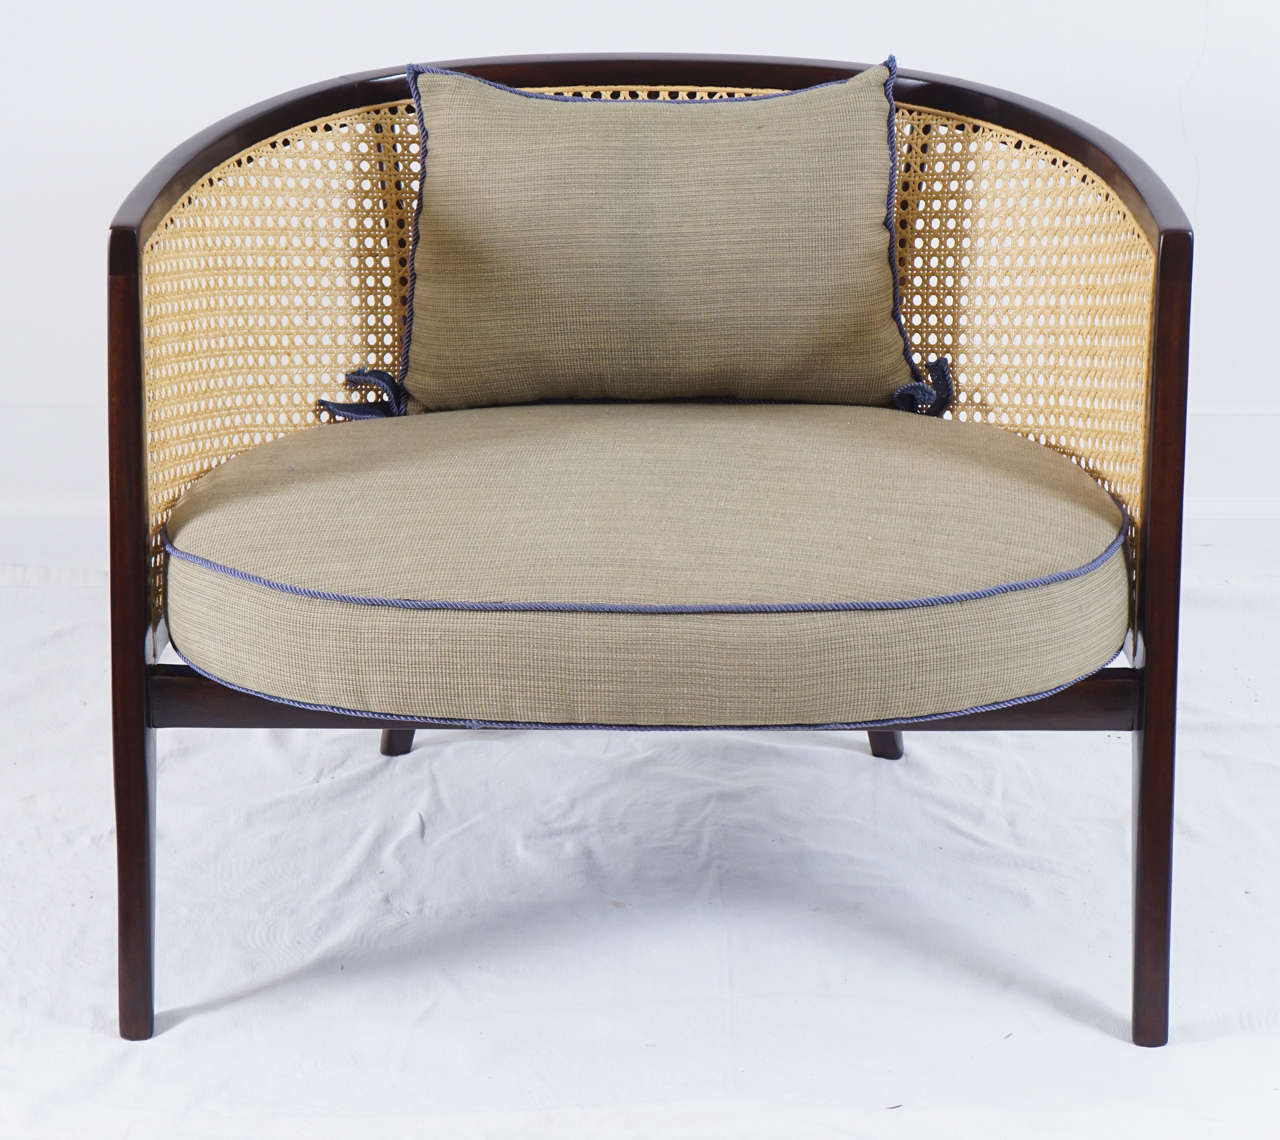 This pair of Harvey Probber chairs have been meticulously restored.
The frames are tight. The caning is new. The wood stain is a custom finish.
The fabric is original to suit your needs.
These chairs are very rare. An identical pair is available